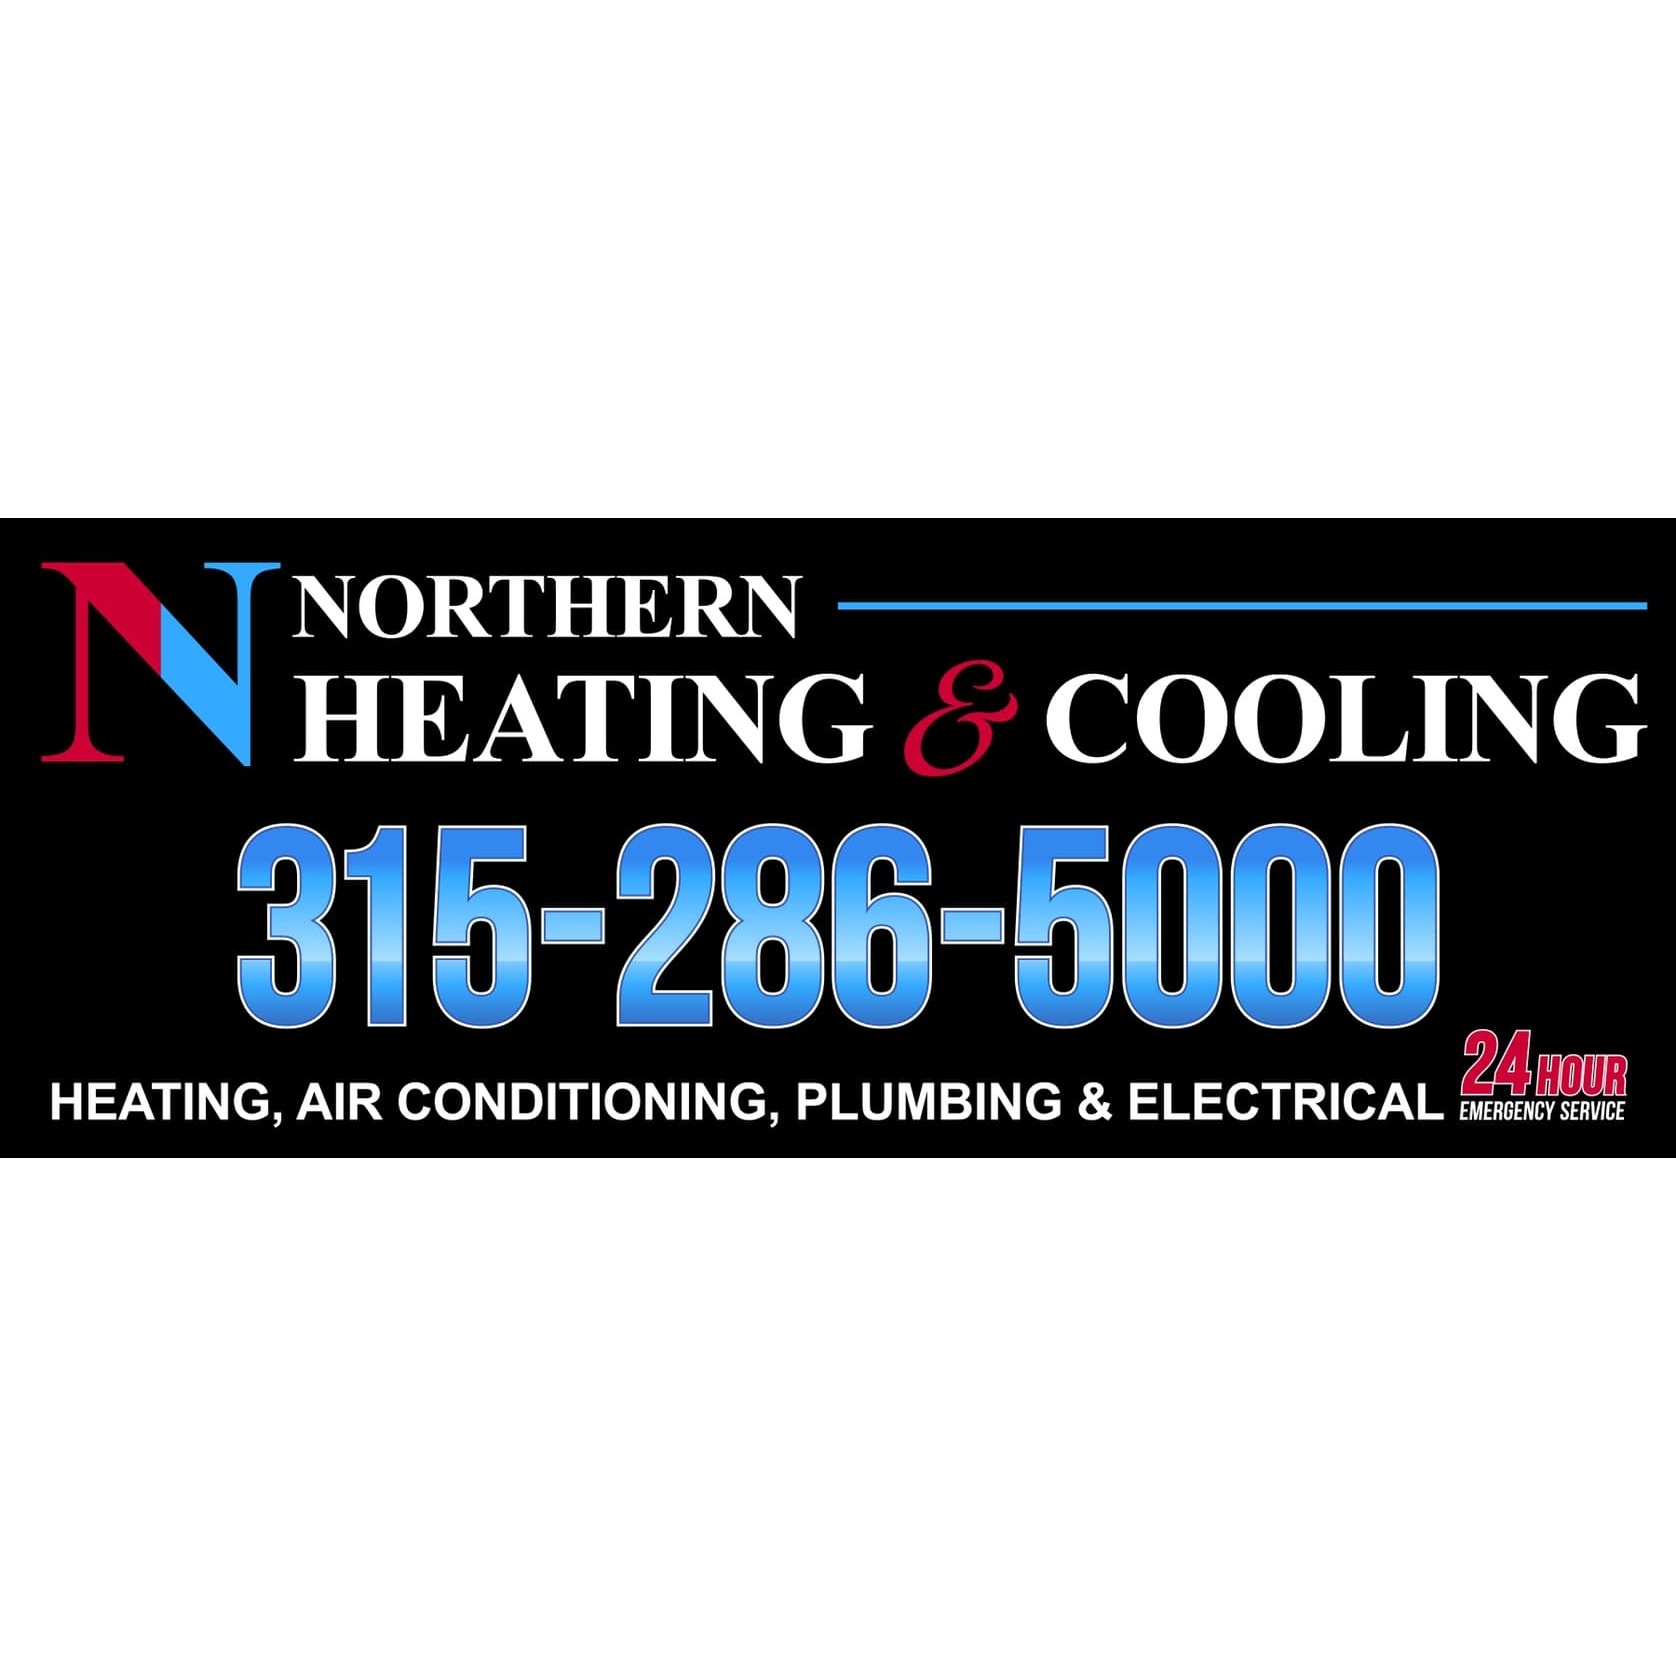 Northern Heating & Cooling 36387 NY-180, La Fargeville New York 13656